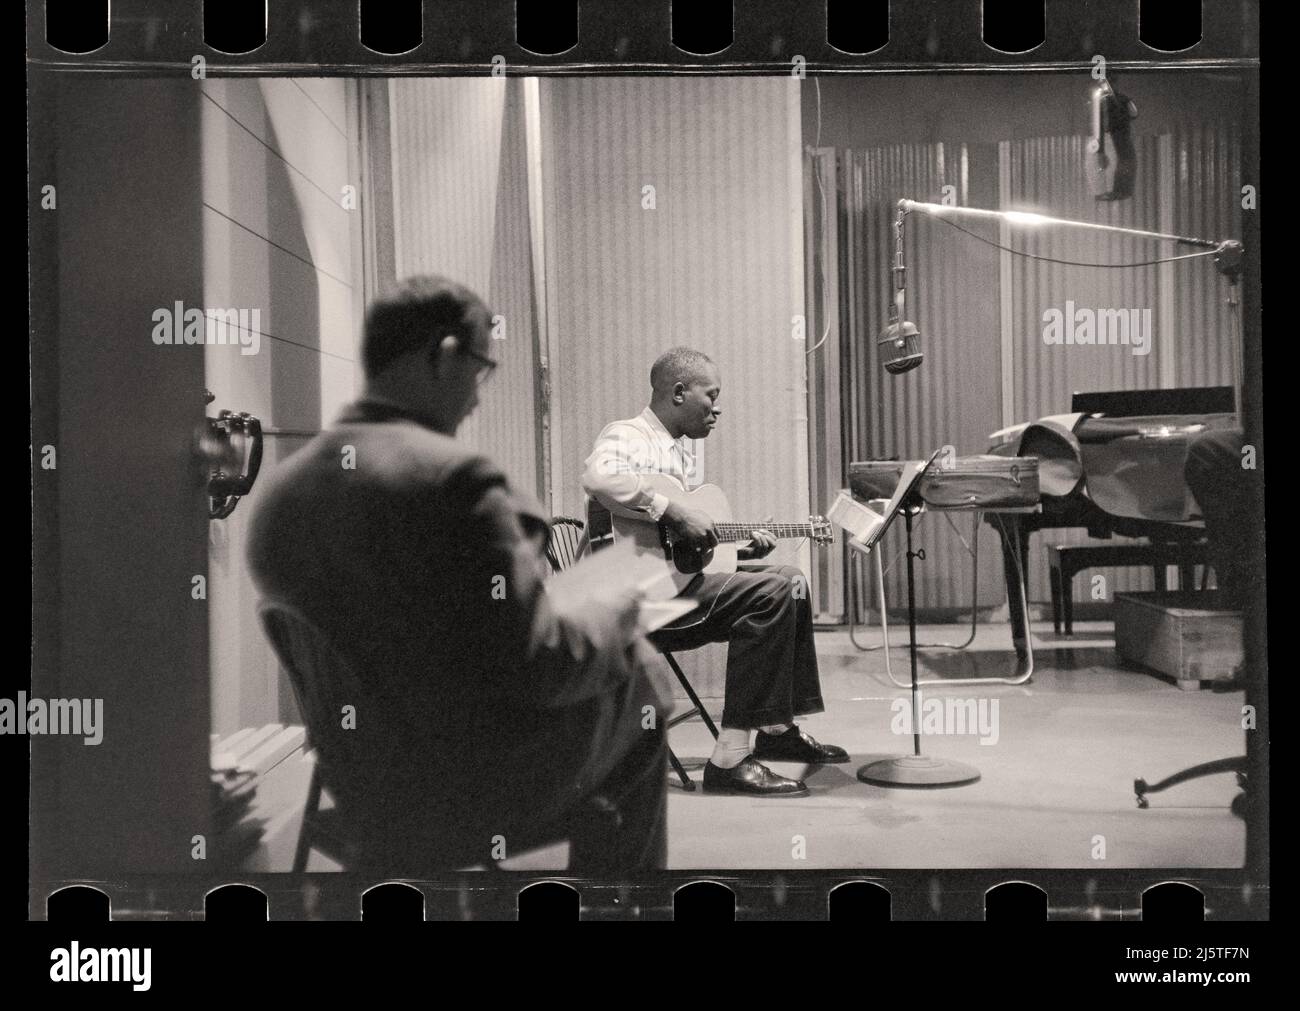 Big Bill Broonzy blues guitar musician, 1958. Image from 35mm negative. Stock Photo